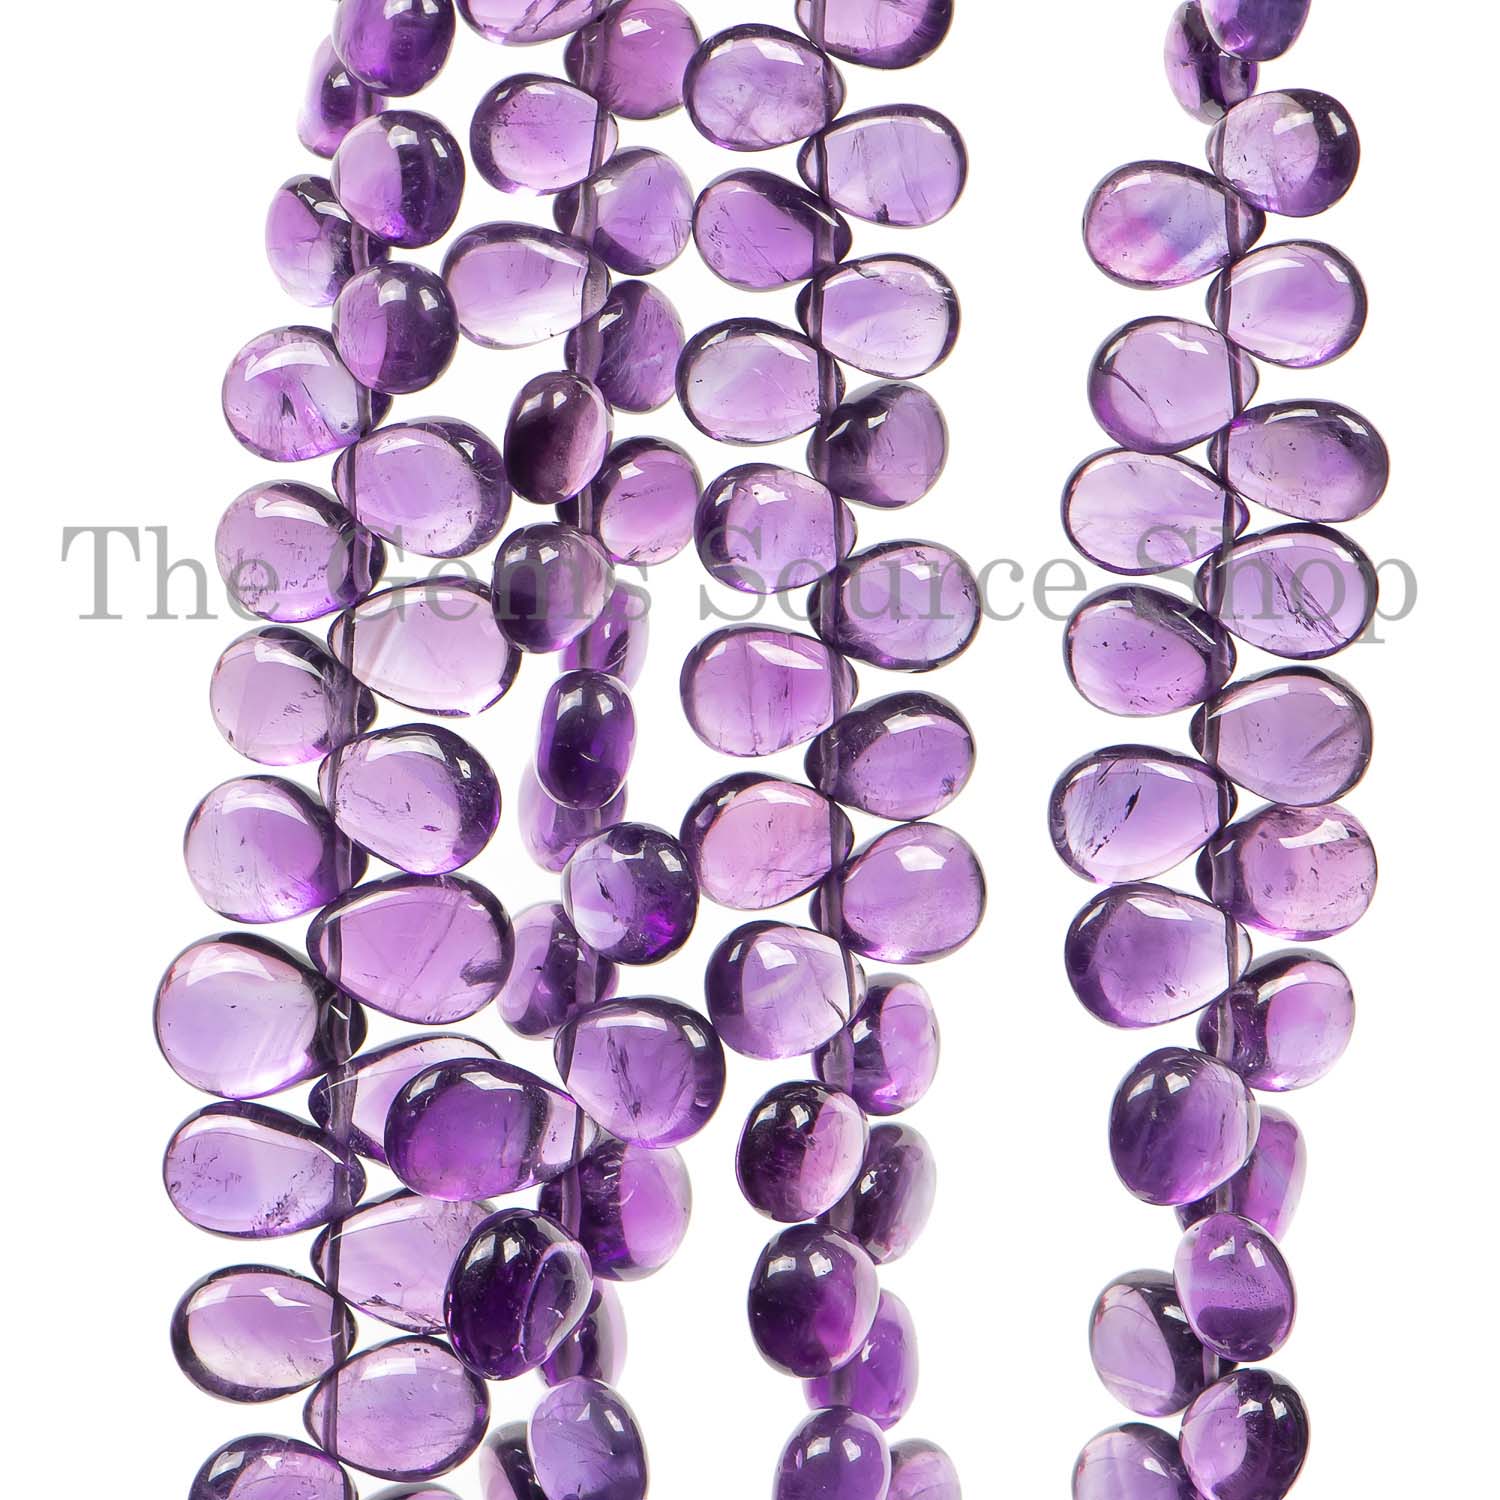 Amethyst Smooth Pear Briolette, Wholesale Gemstone Beads, Jewelry Making Beads